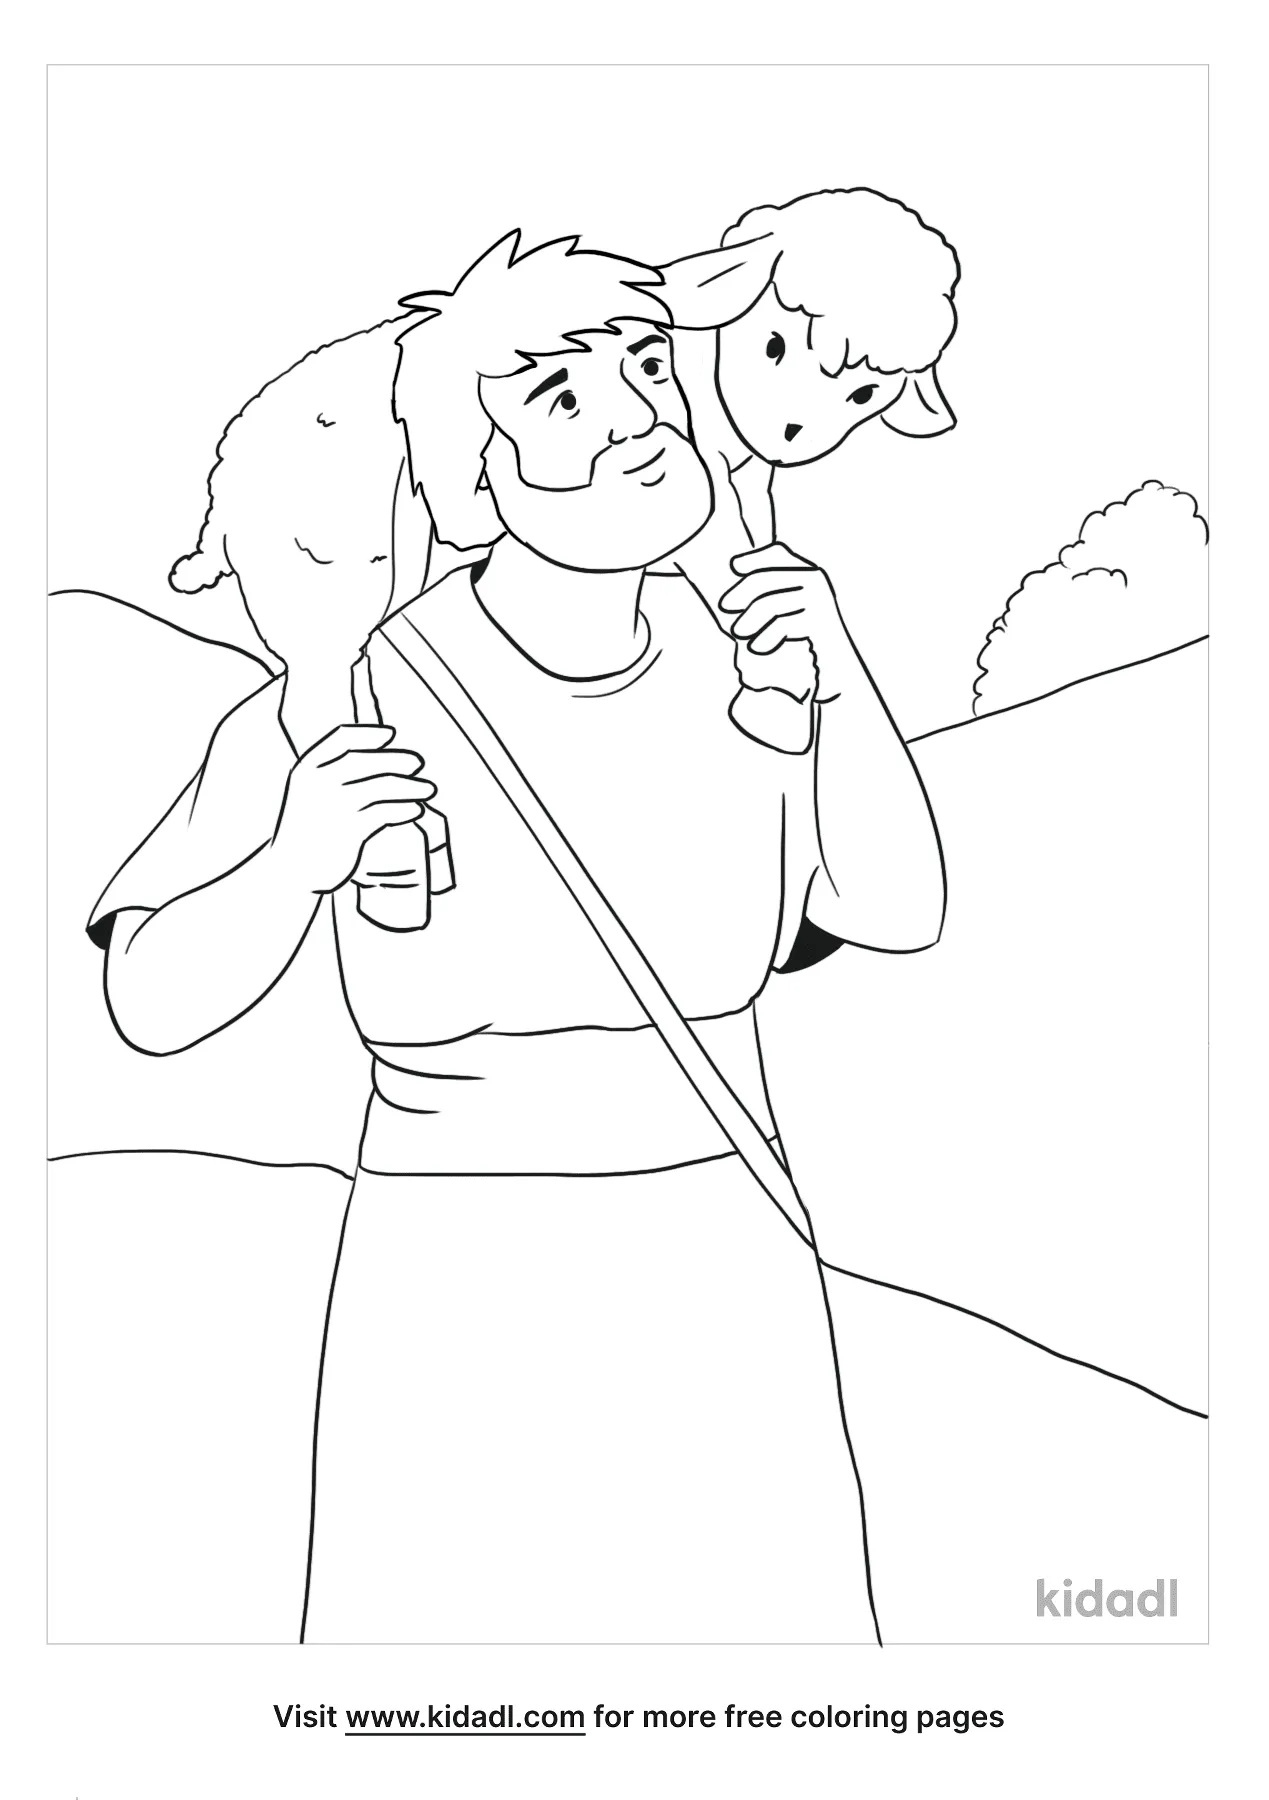 Parable Of The Lost Sheep Coloring Pages   Free Bible Coloring ...